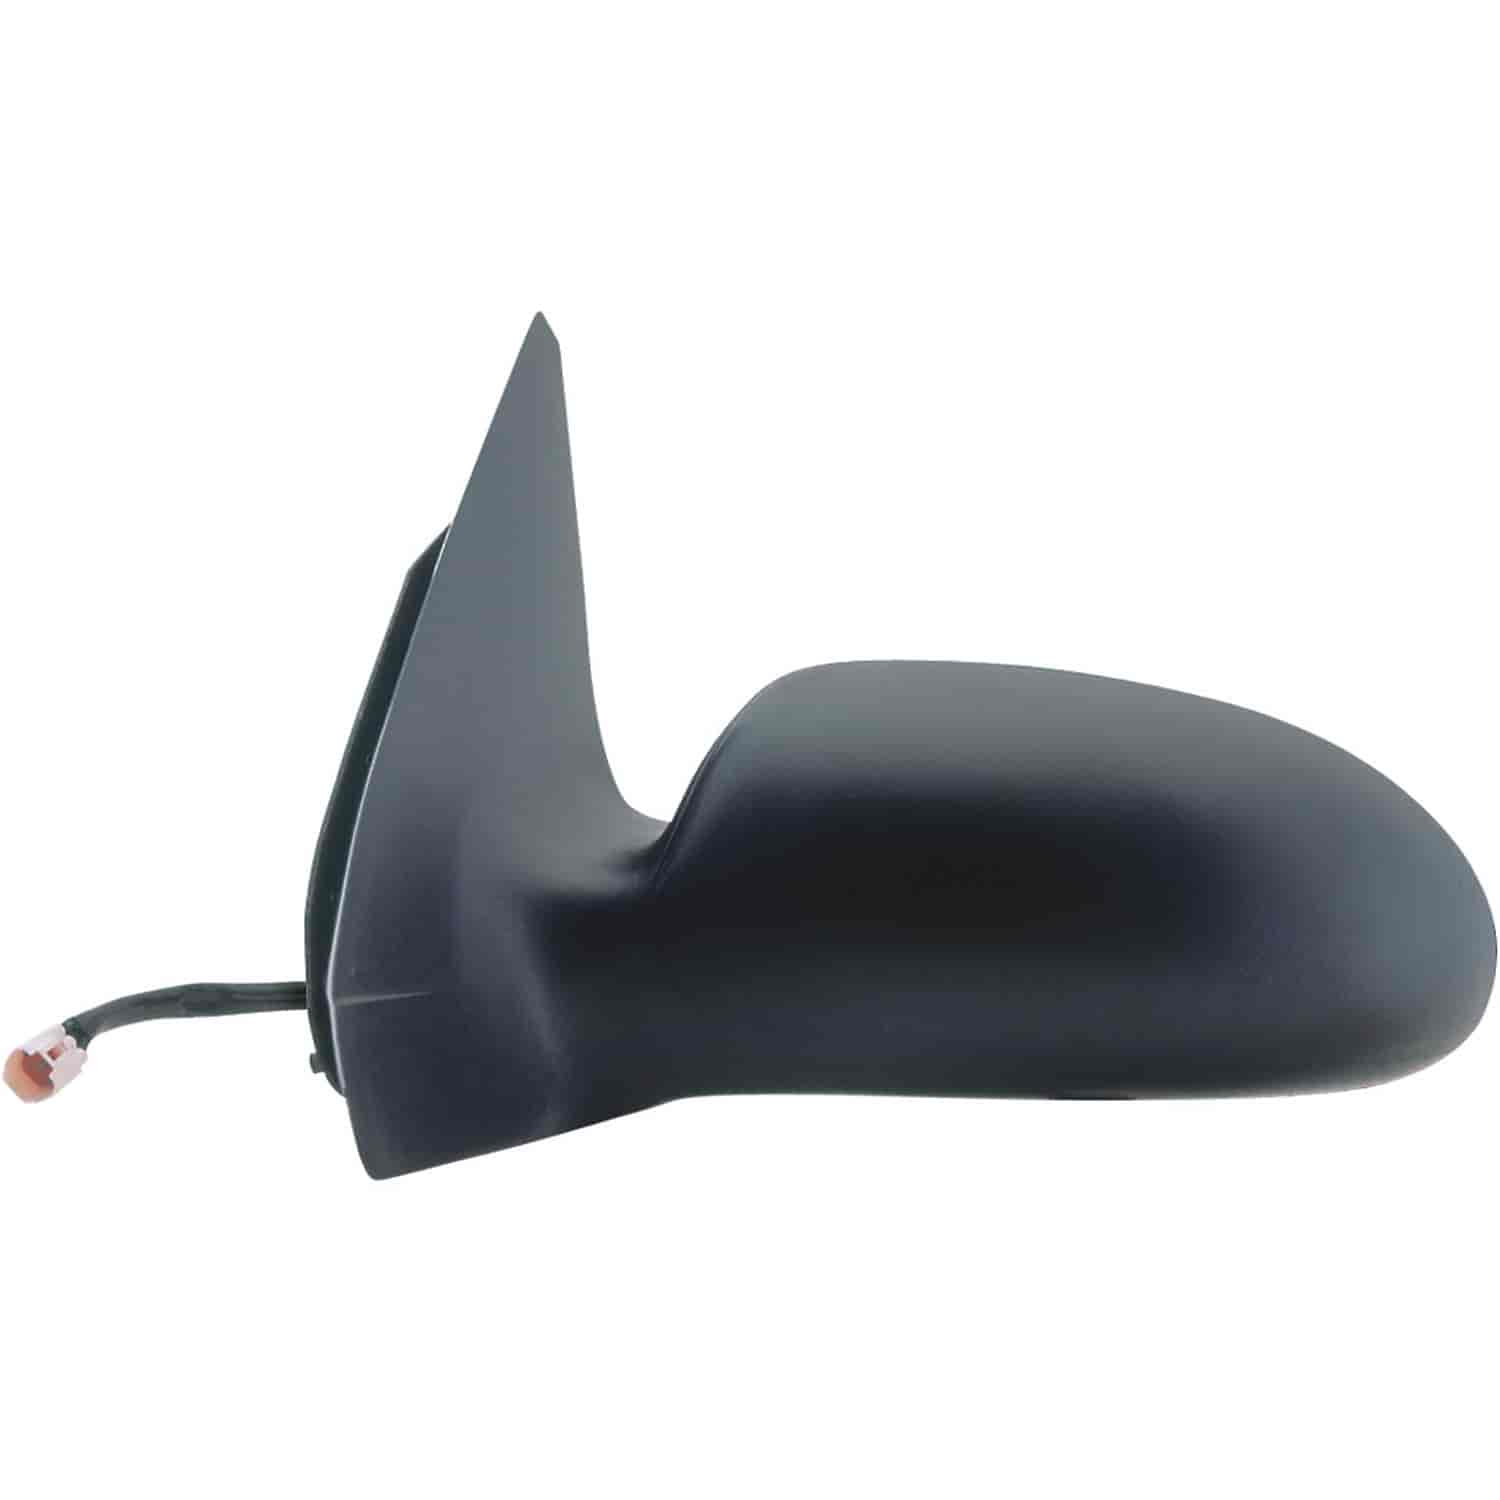 OEM Style Replacement mirror for 03-07 Ford Focus w/o SVT/ST model driver side mirror tested to fit